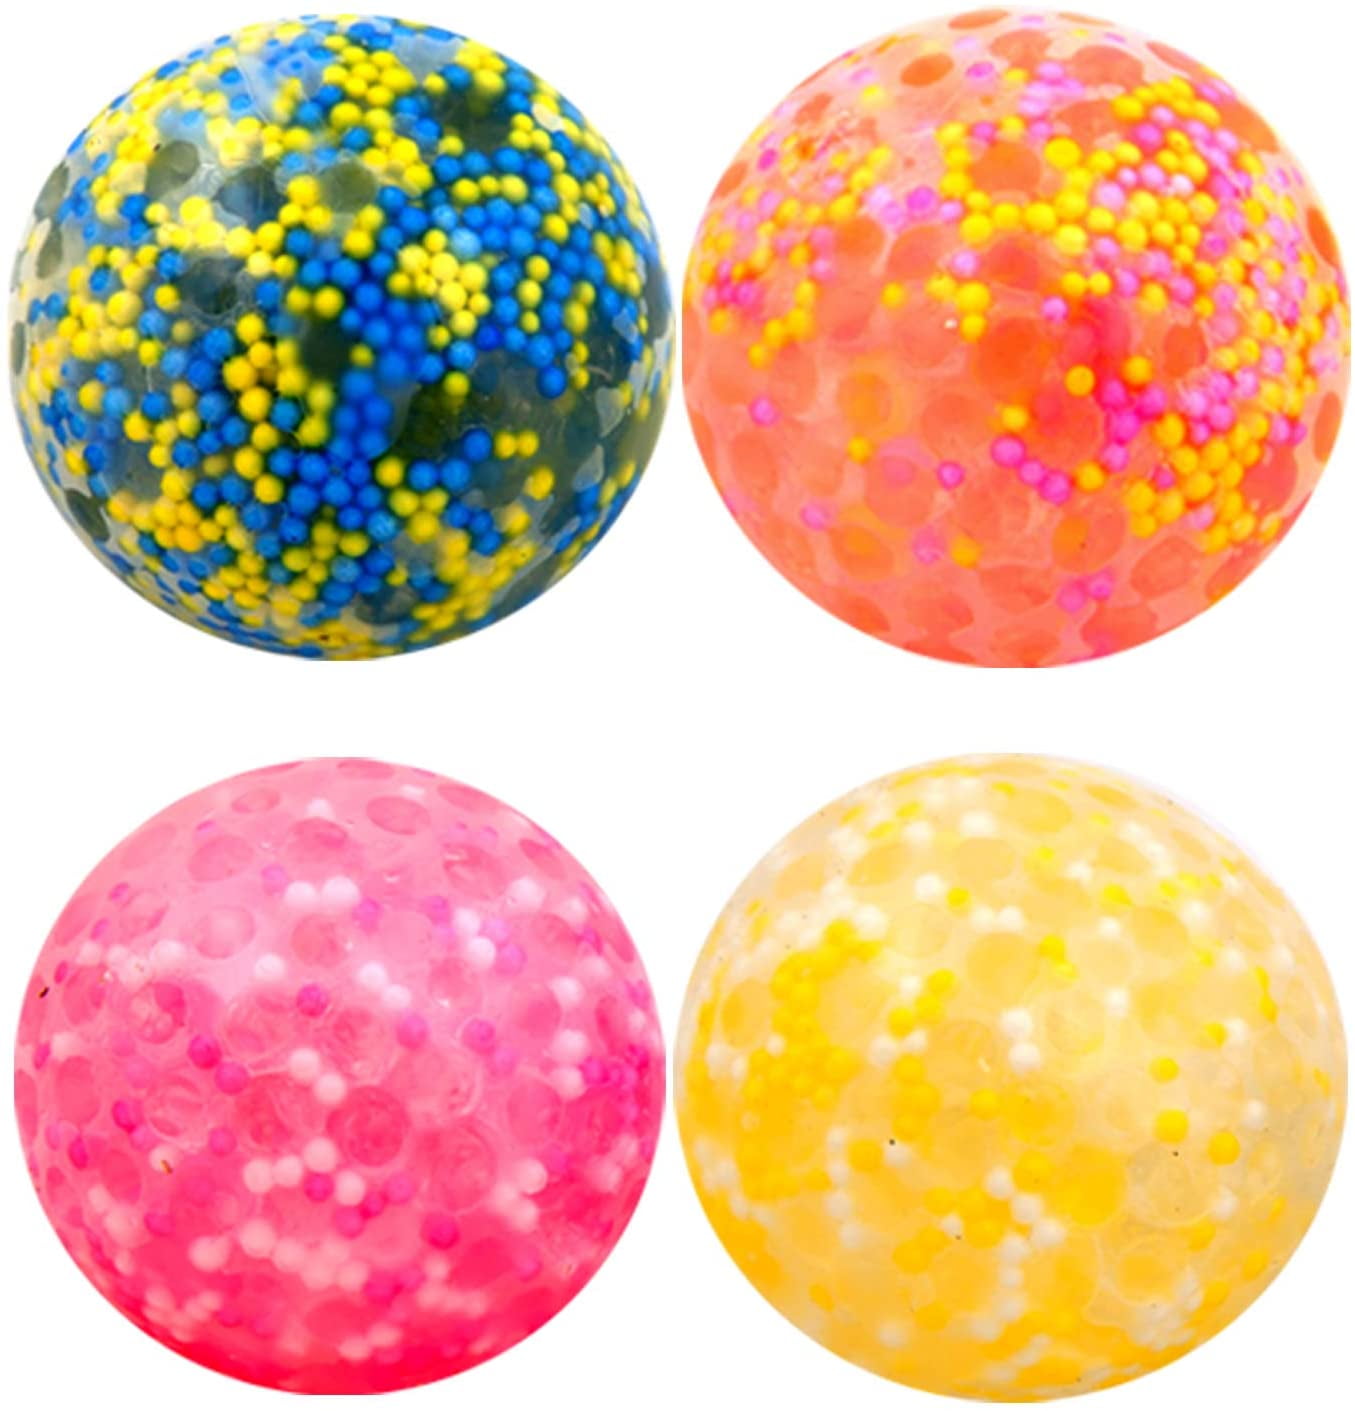 3 Stress Balls Stress Relief Ball Squeezy Stress Balls for Kids and Adults 